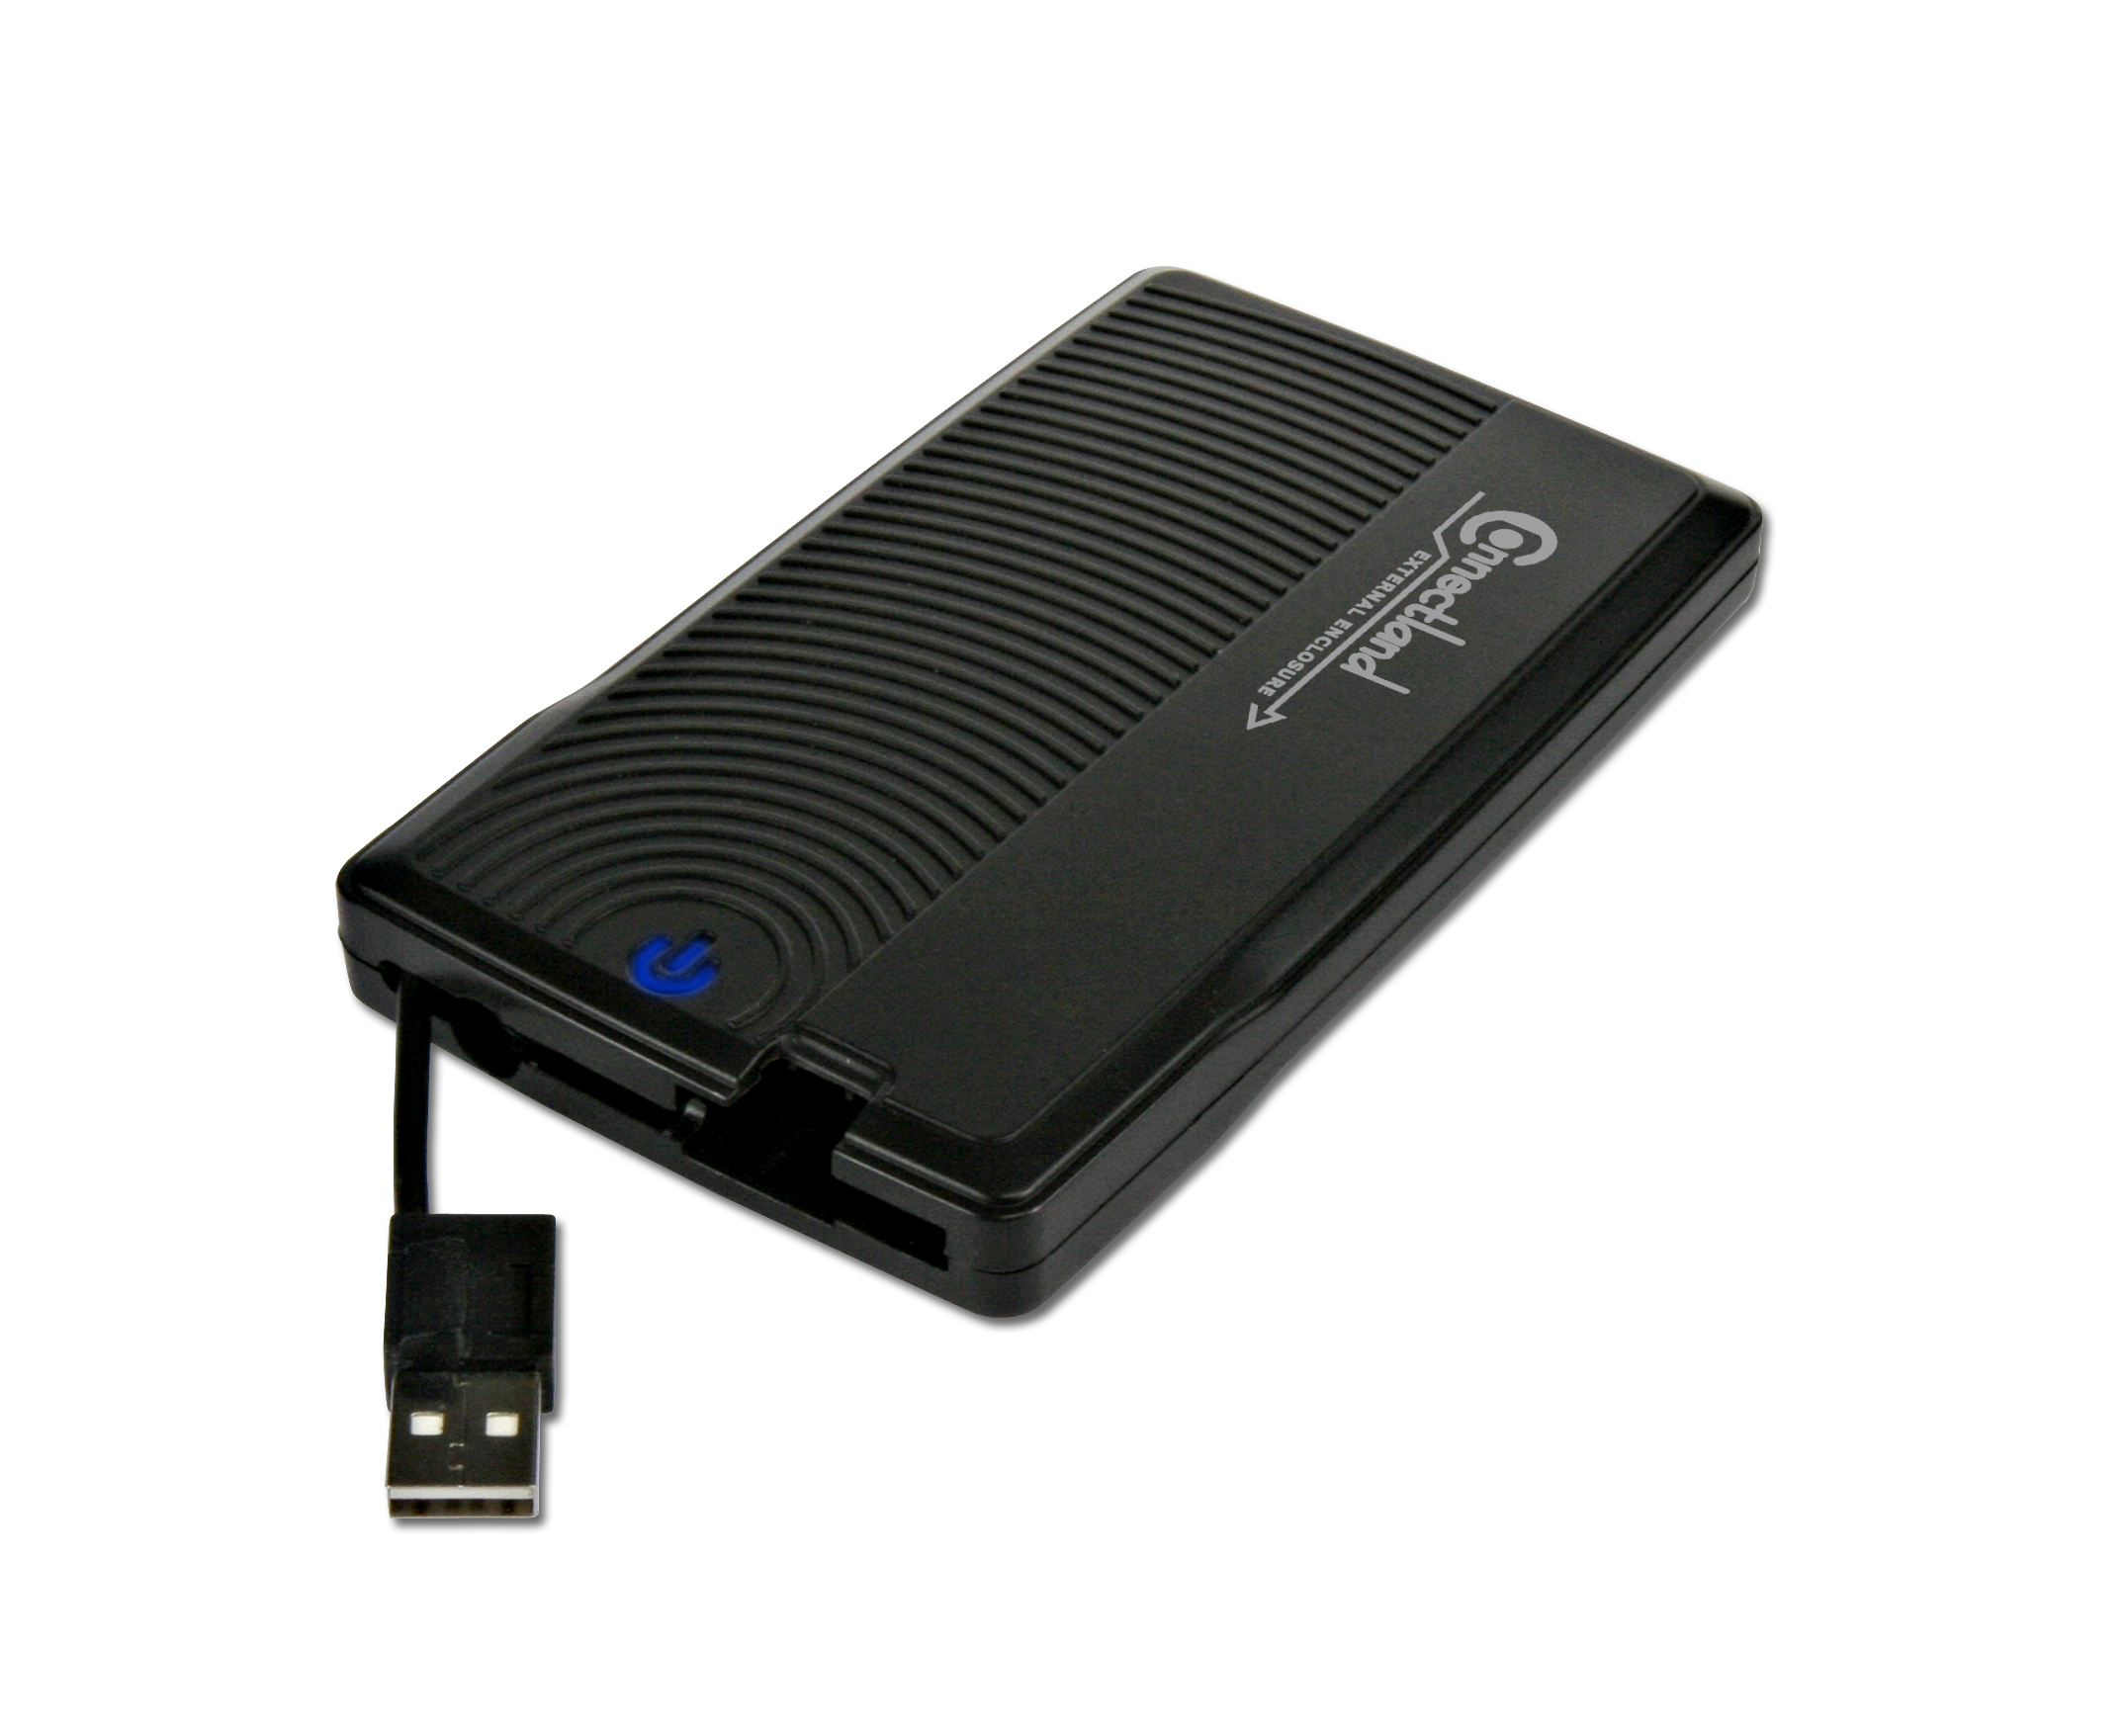 Rouge Connectland CONNECTLAND Boitier externe USB 3.0-2'1/2 S-ATA 